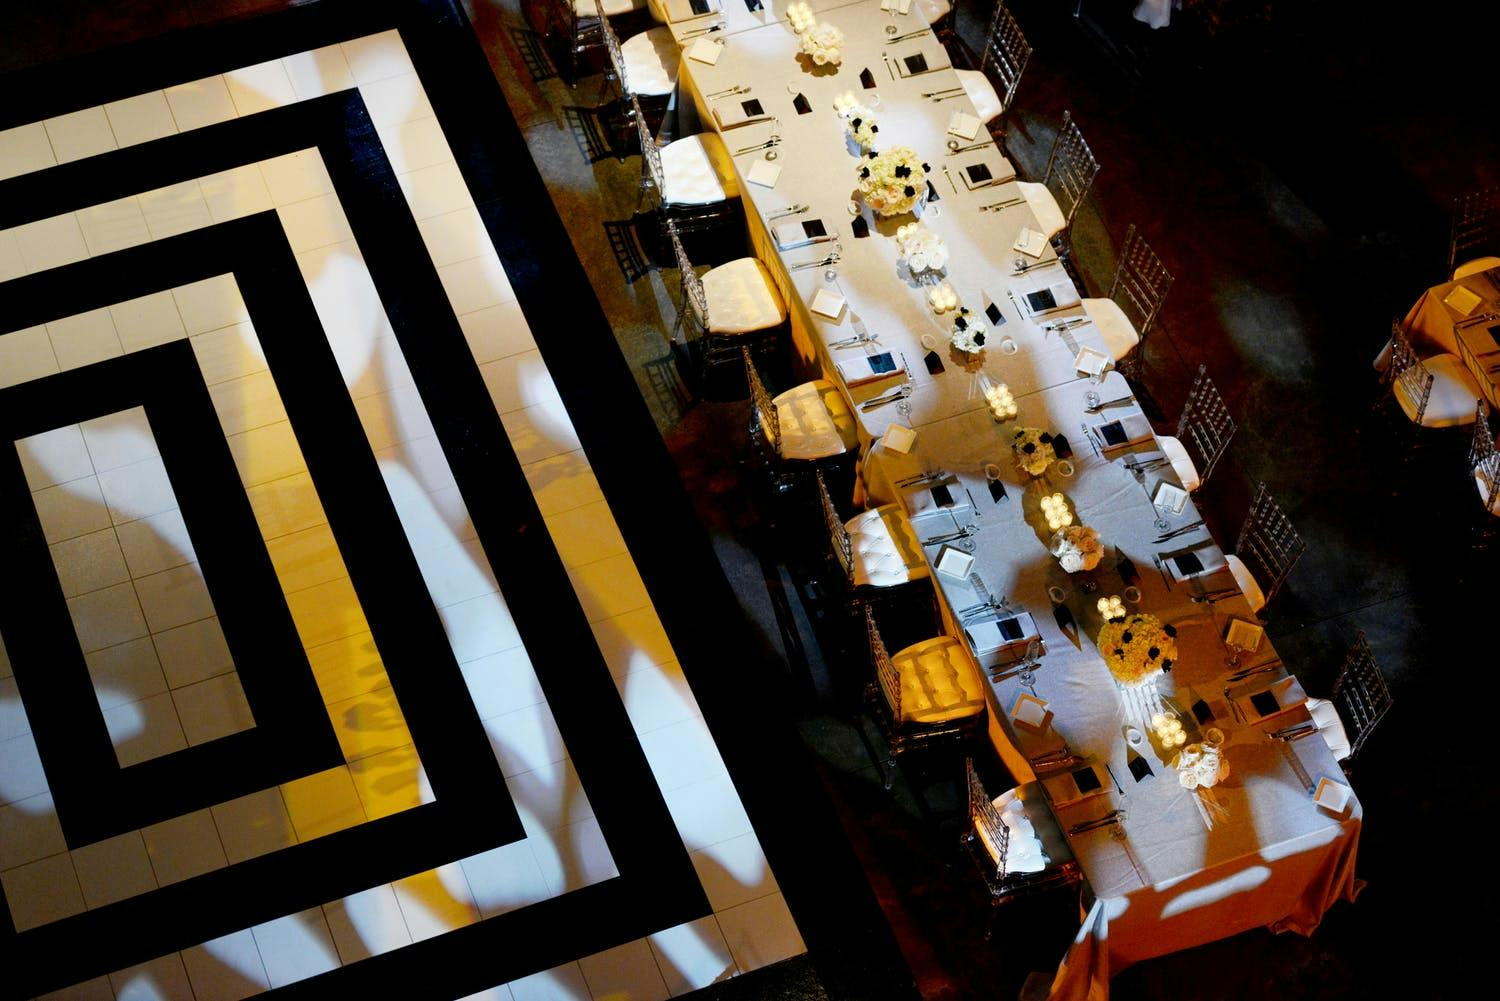 Wedding Reception Table With Black and White Dance Floor With Concentric Rectangles | PartySlate